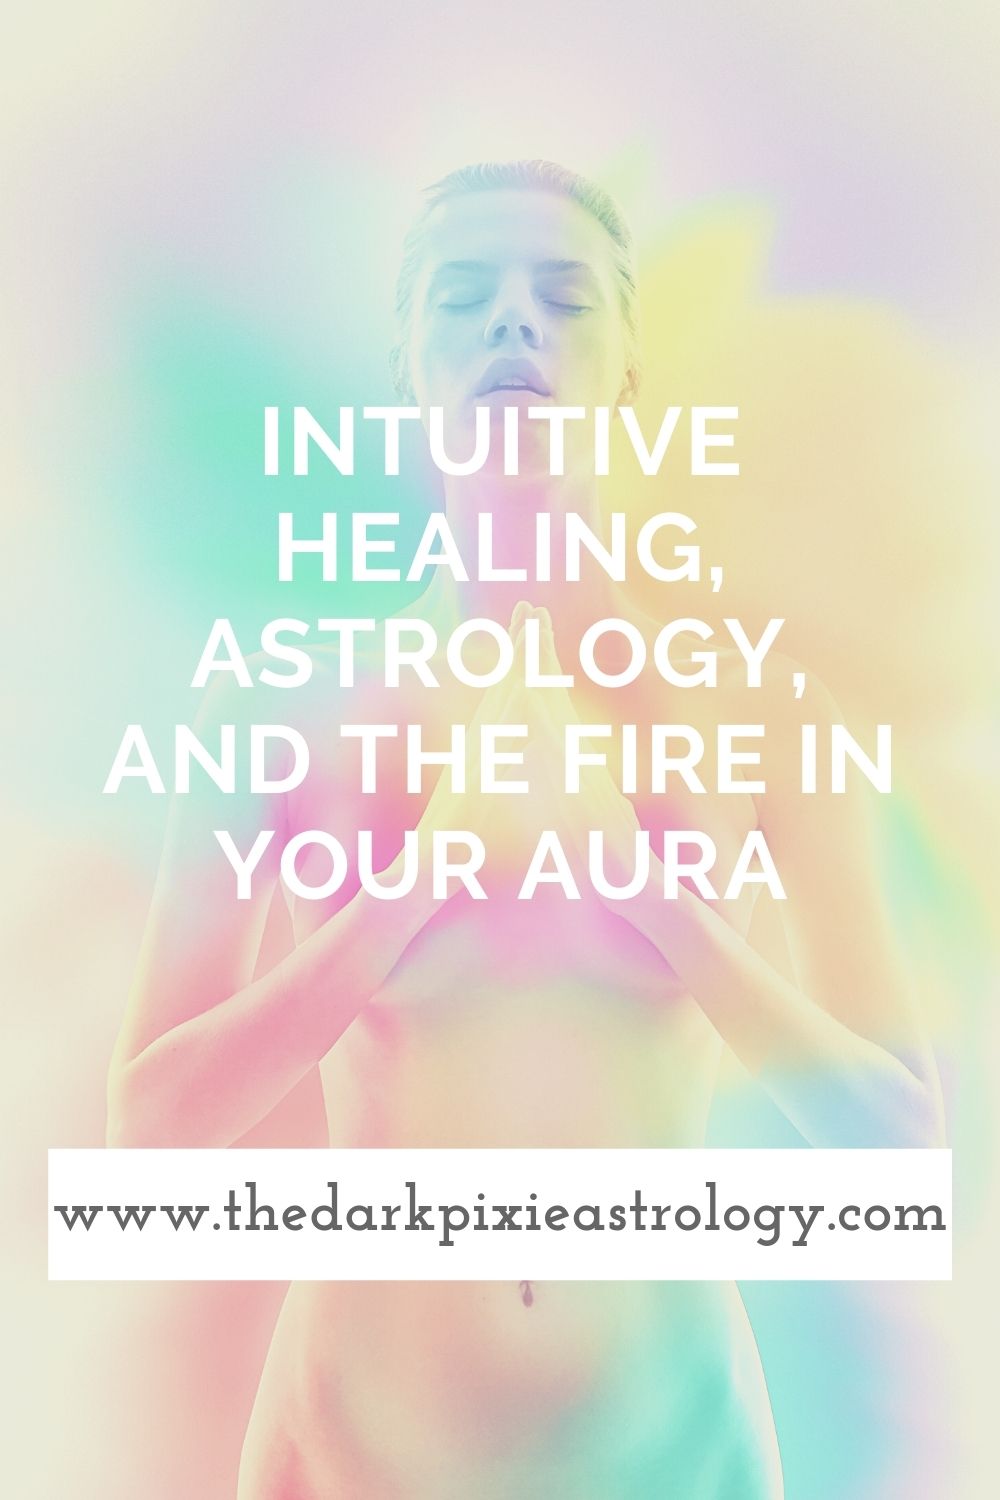 Intuitive Healing, Astrology, and the Fire in your Aura by Regina Chouza for The Dark Pixie Astrology